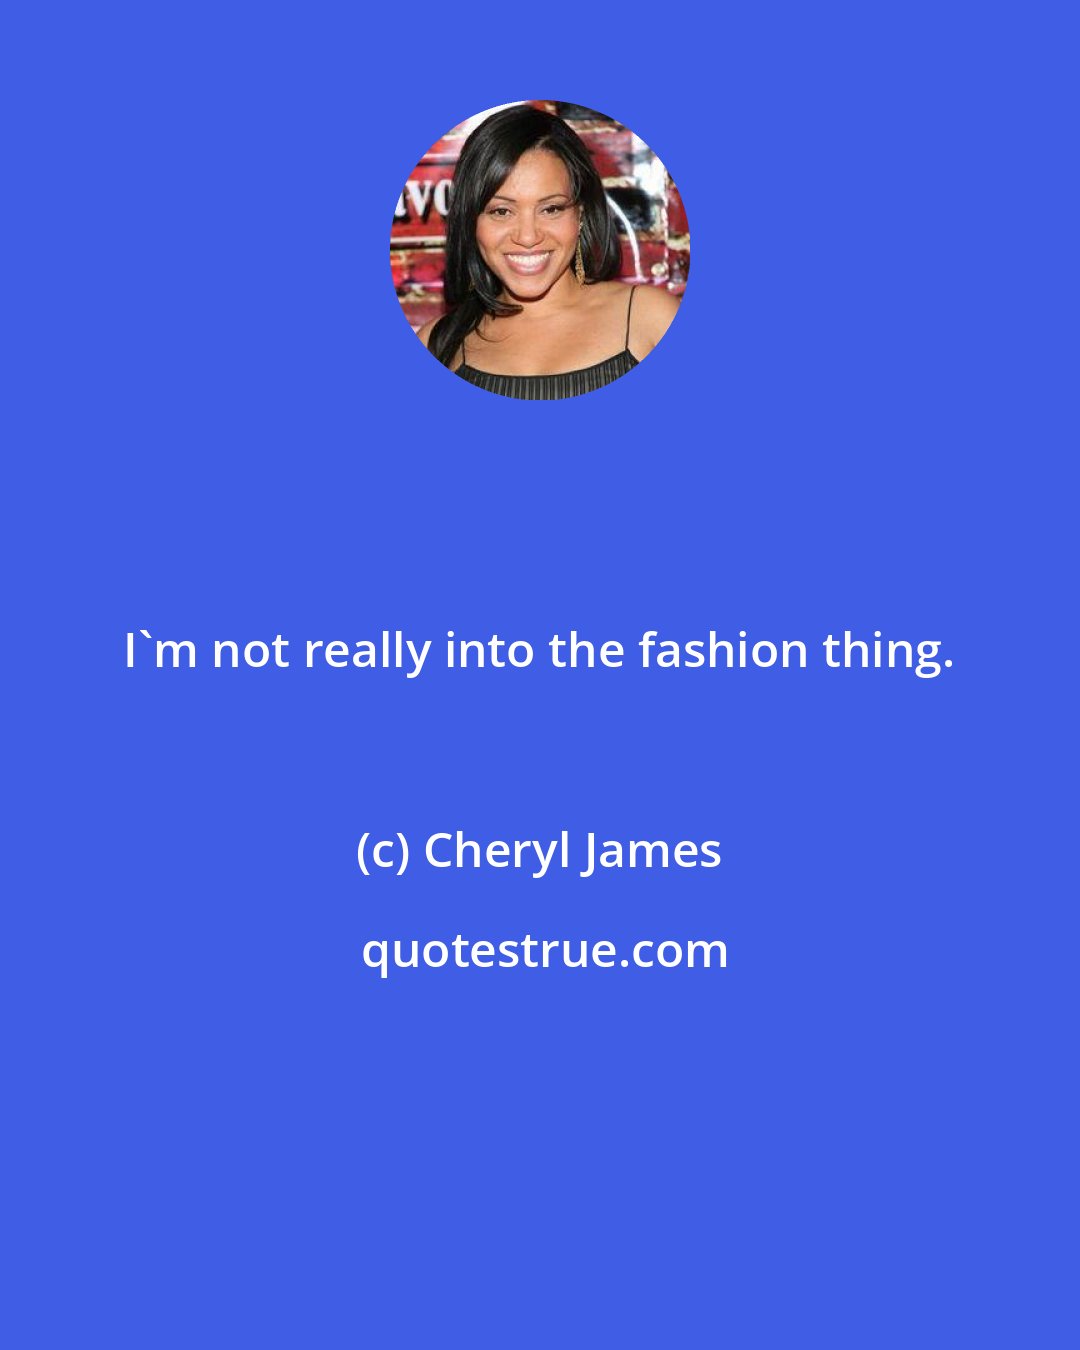 Cheryl James: I'm not really into the fashion thing.